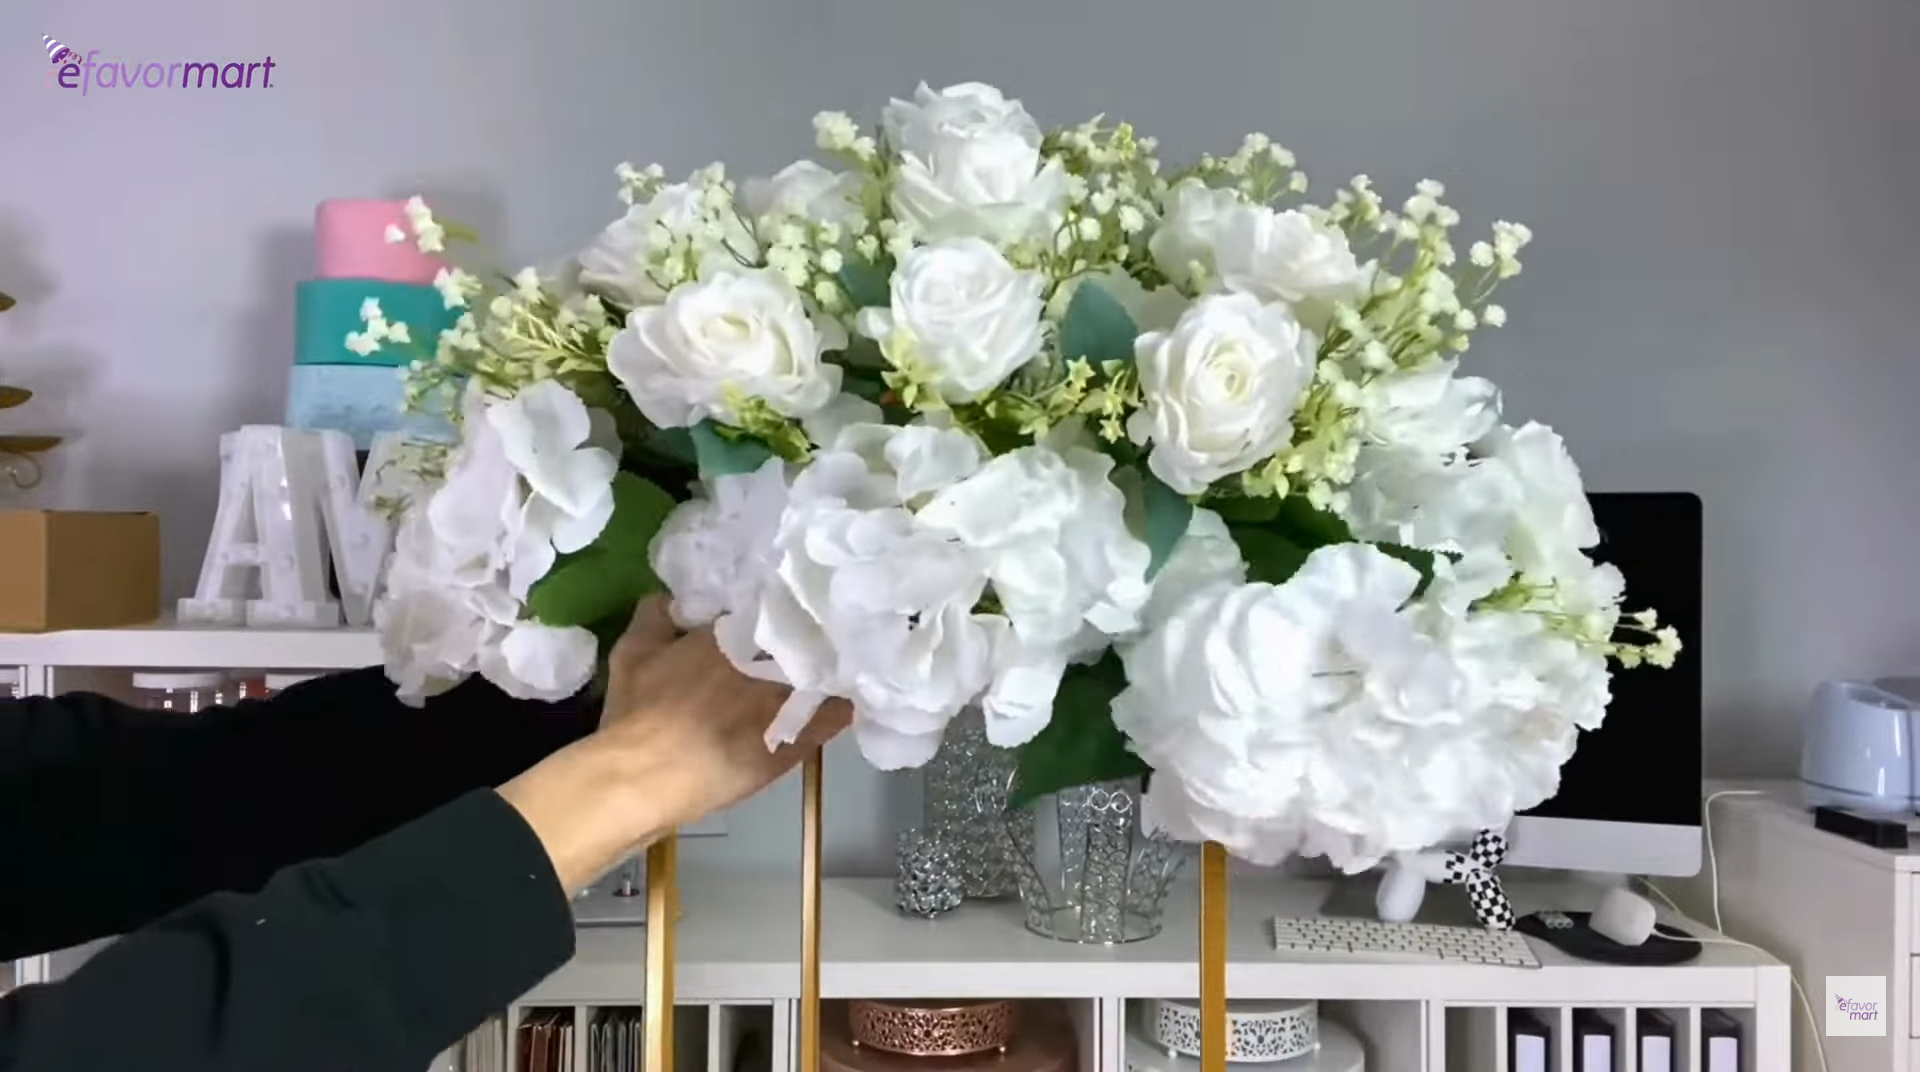 Placing a wedding floral arrangement in a stand